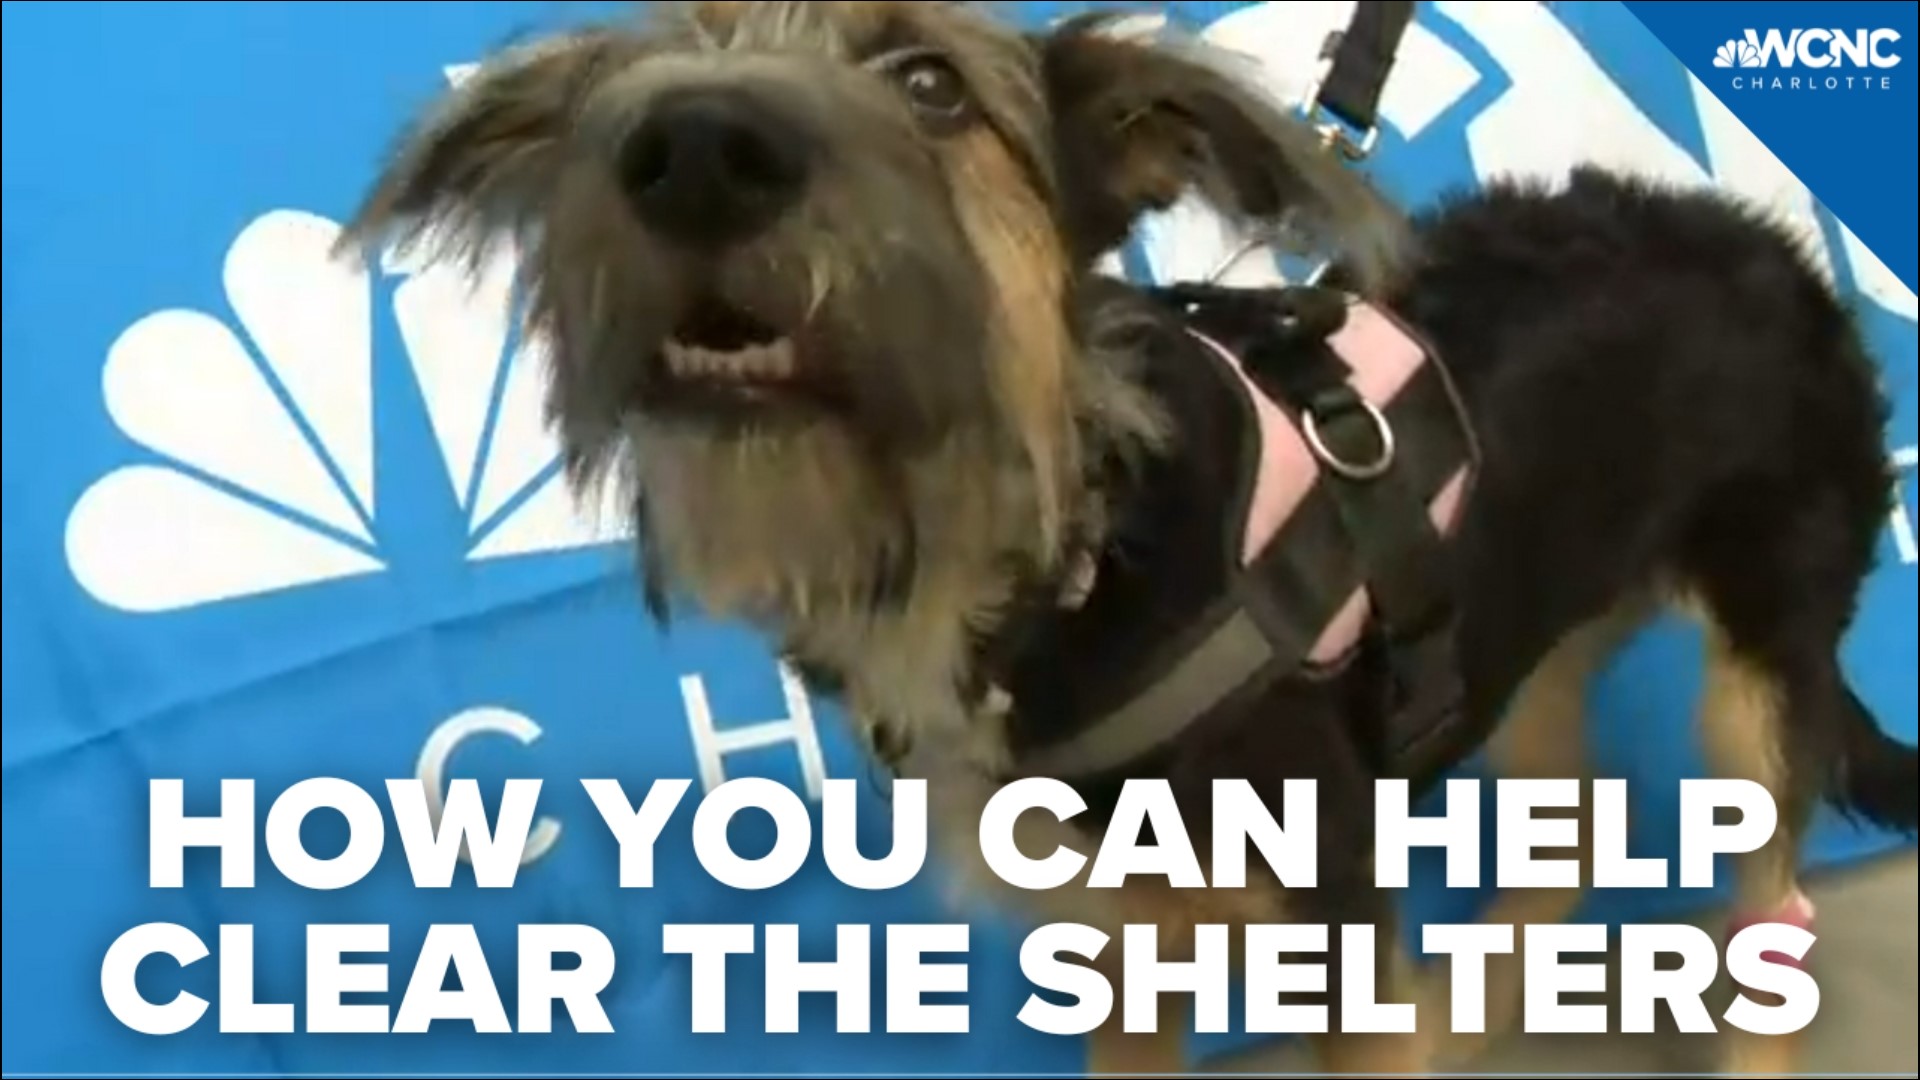 The Charlotte Knights are encouraging Charlotte residents to help clear the shelters.